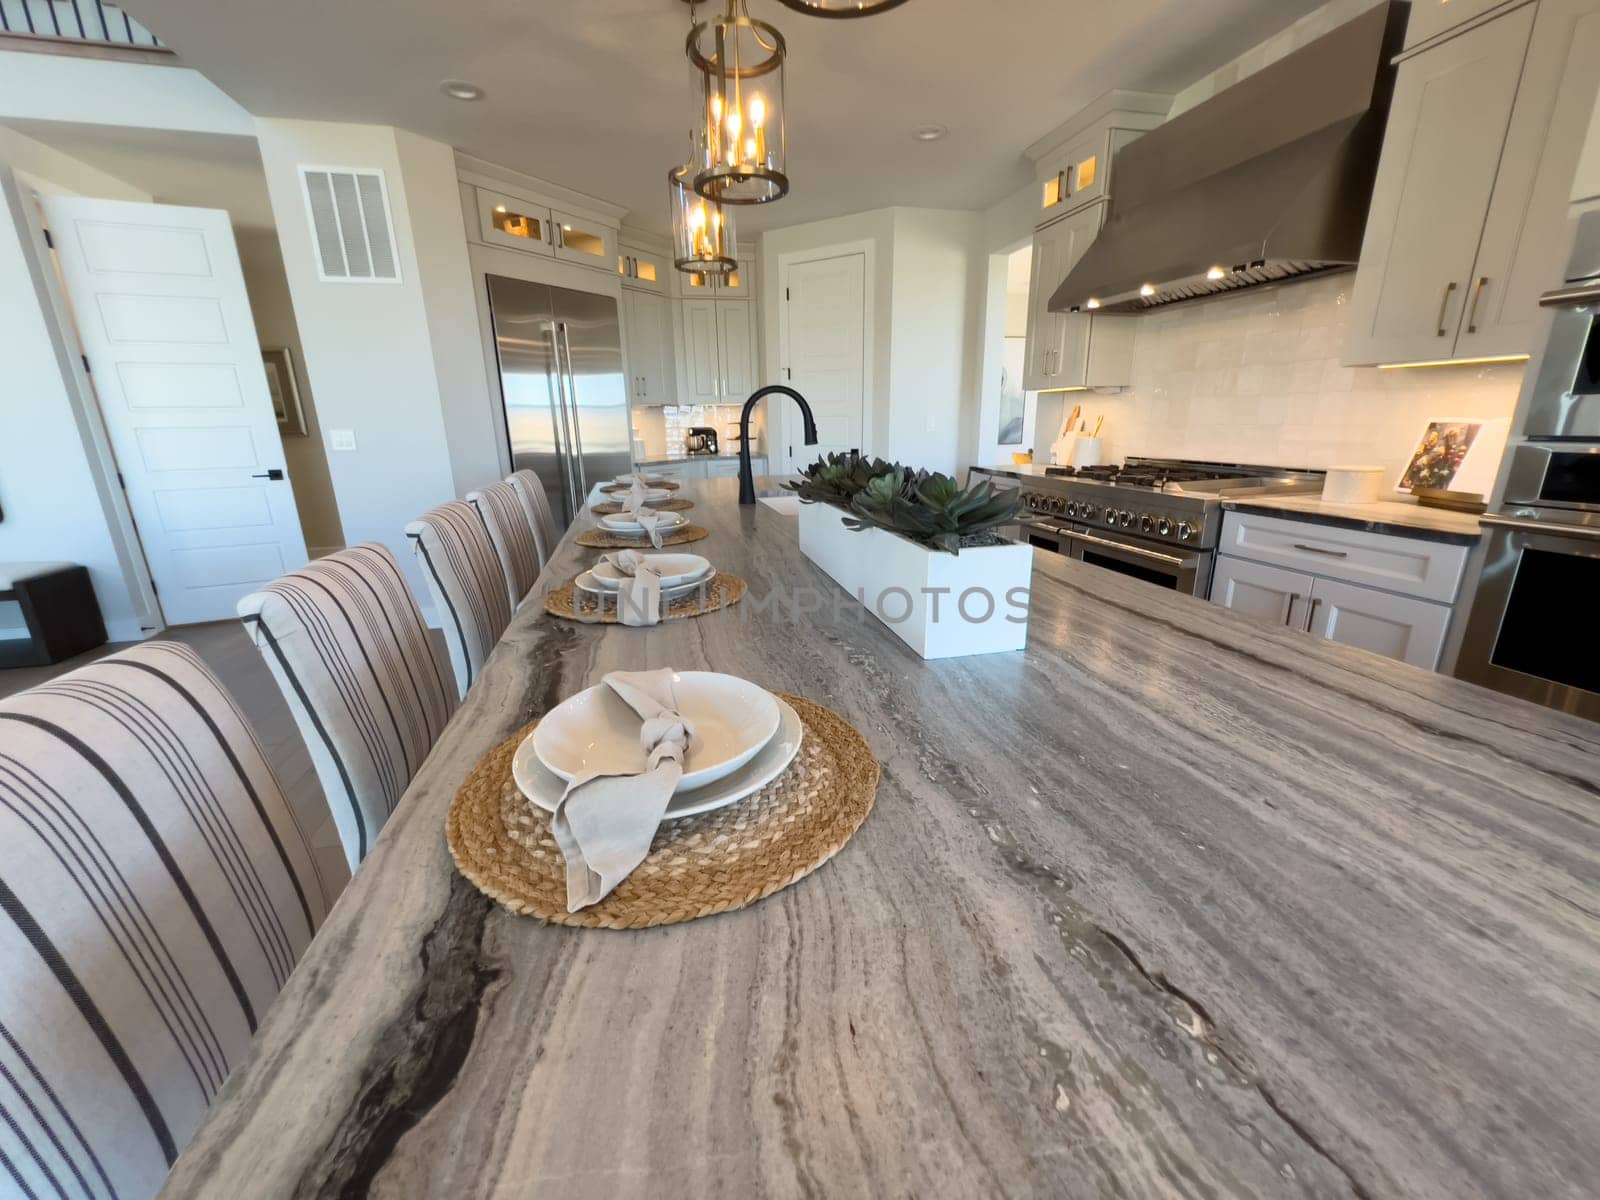 Coastal Elegance Meets Functionality in Spacious Kitchen and Dining Area by arinahabich